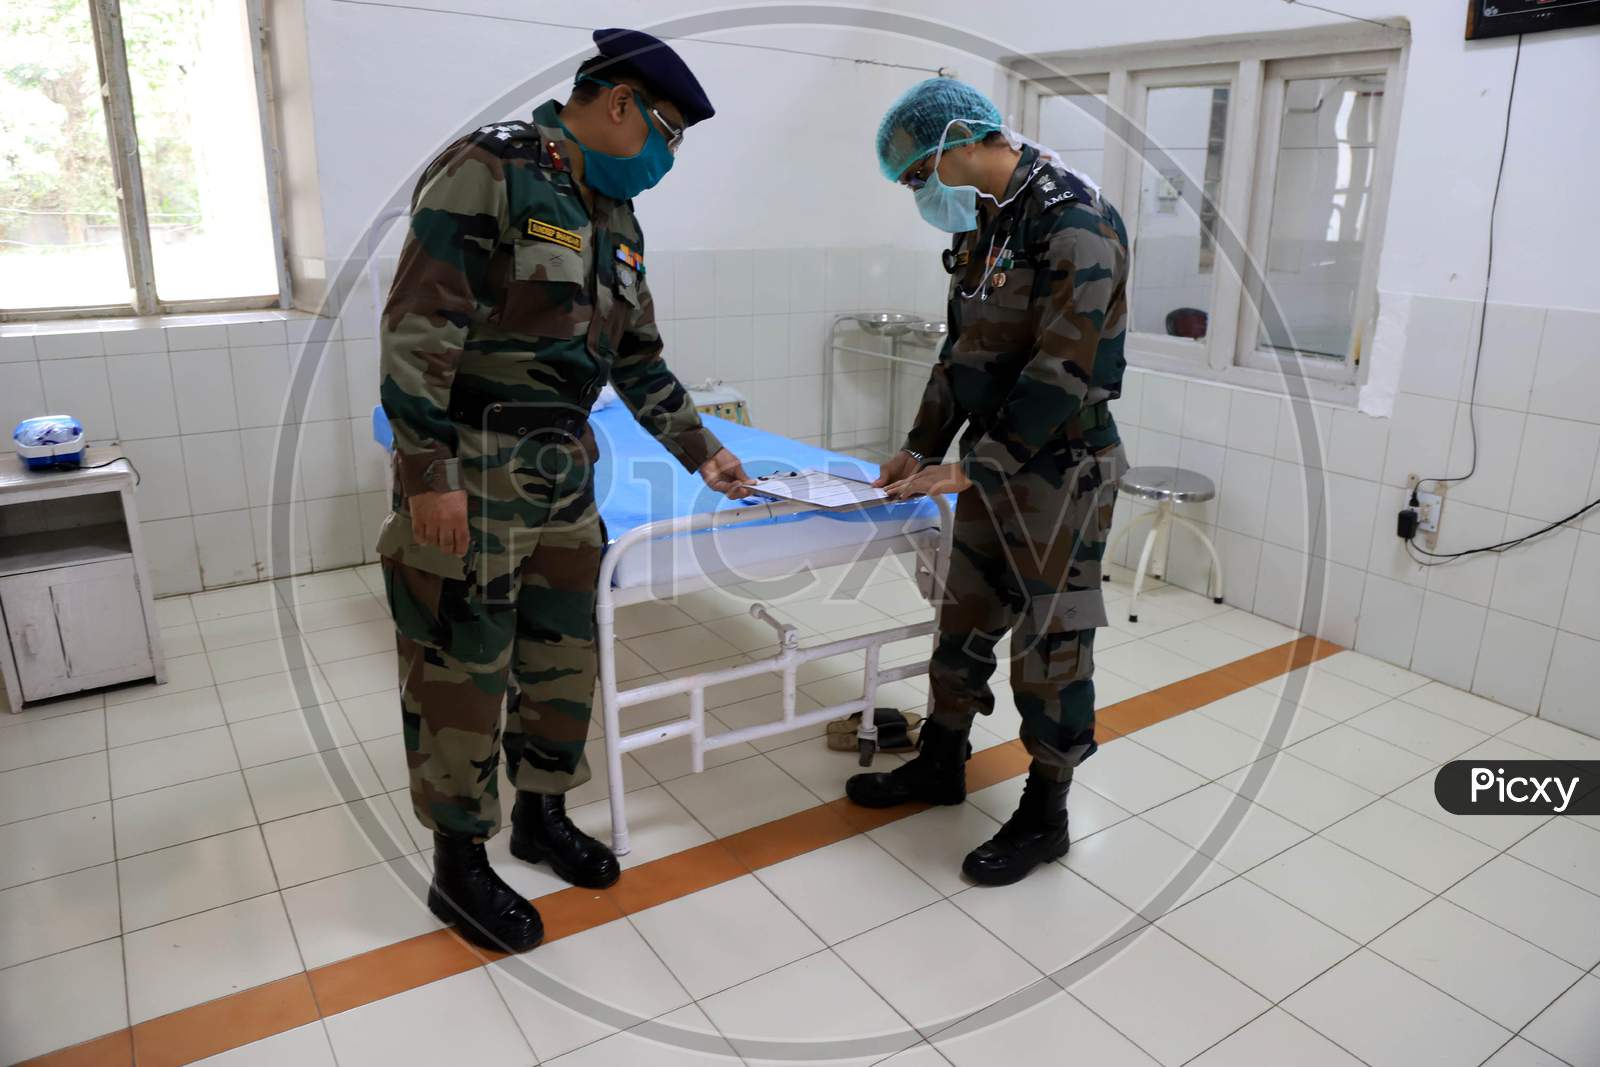 Army Officers Visit Covid Ward To Set Up A Quarantine Facility During Nationwide Lockdown Amidst Coronavirus or COVID-19 Outbreak in Prayagraj.April 24,2020